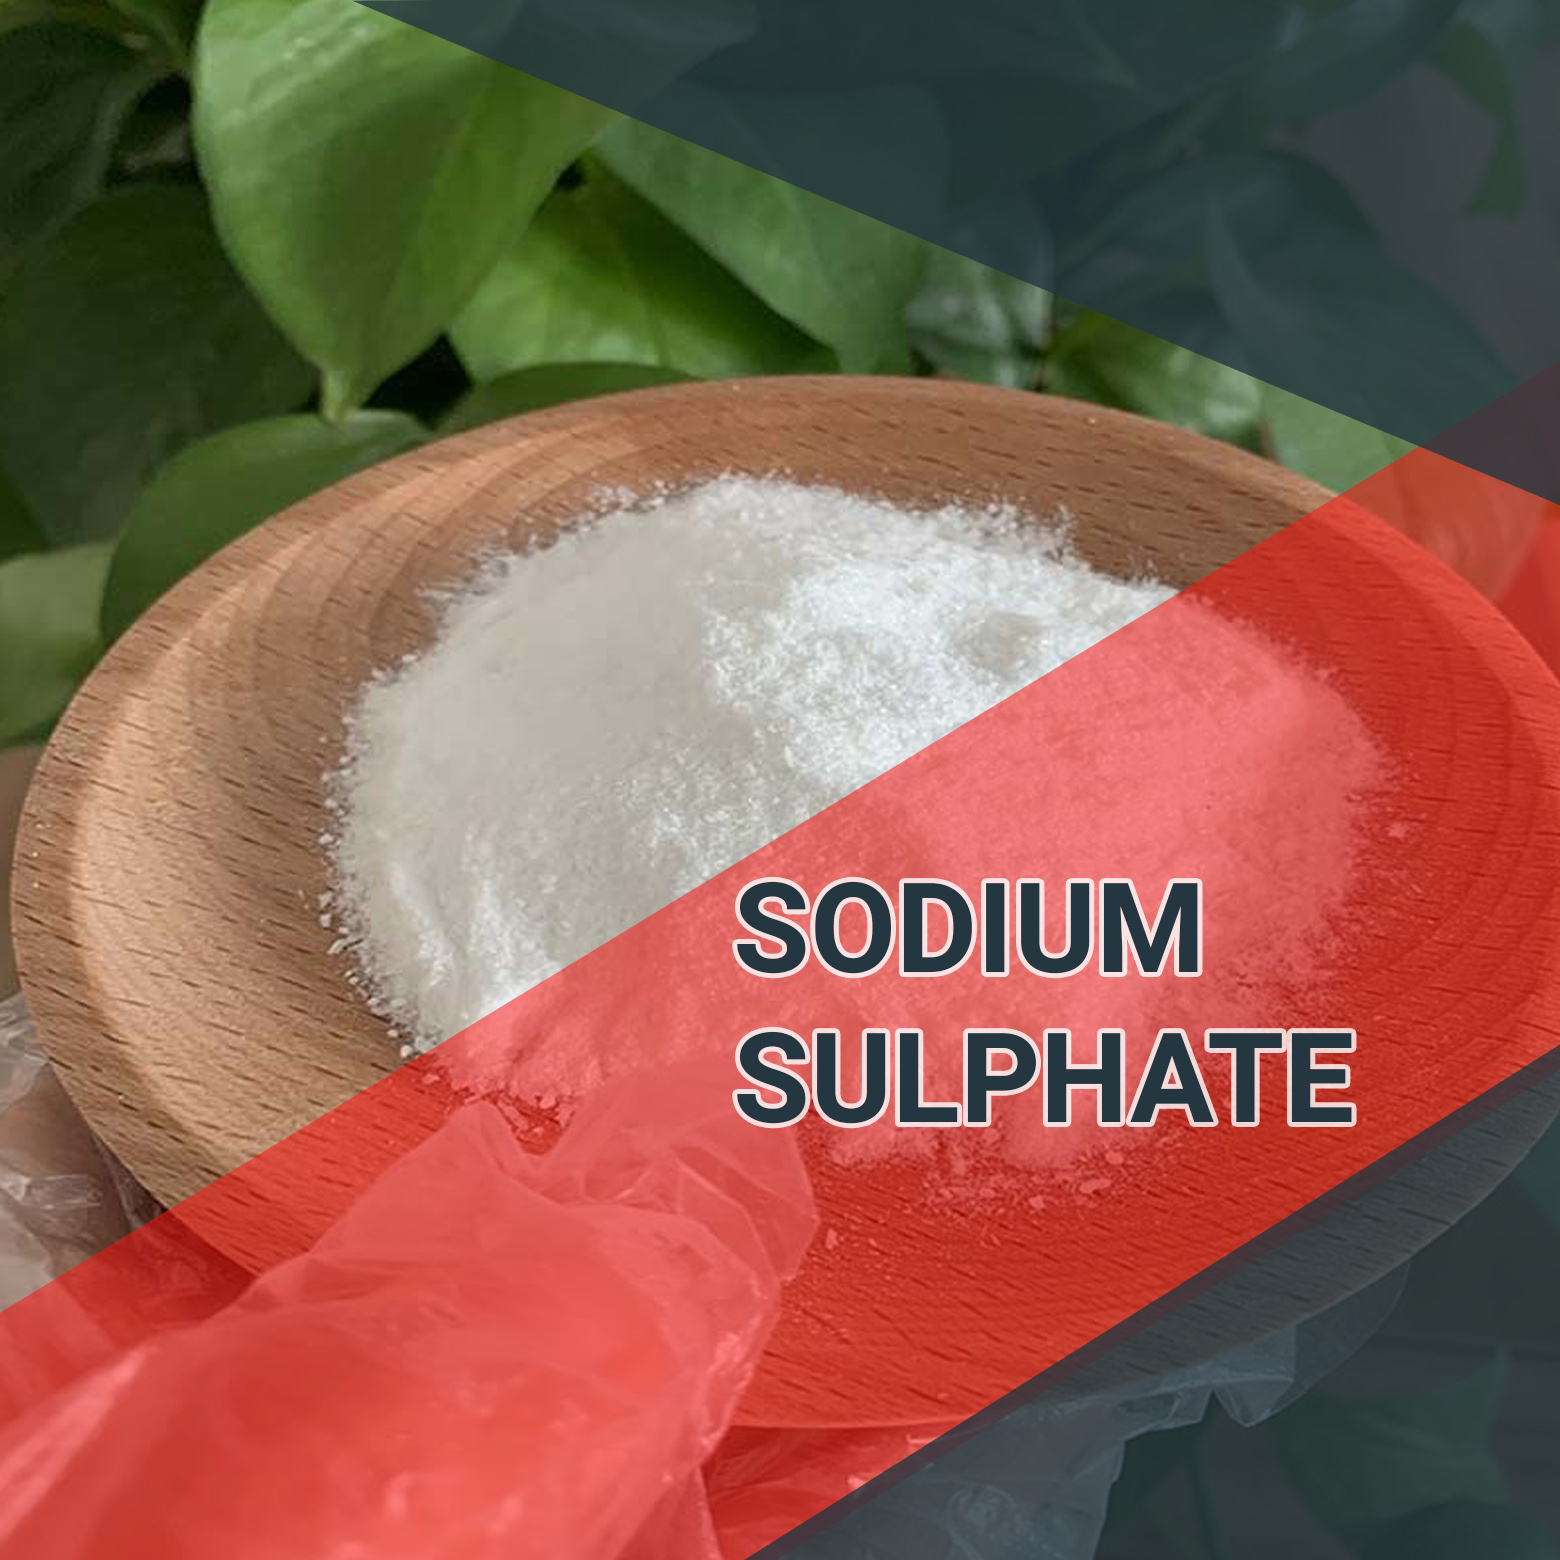 Sodium Sulphate In Sikasso